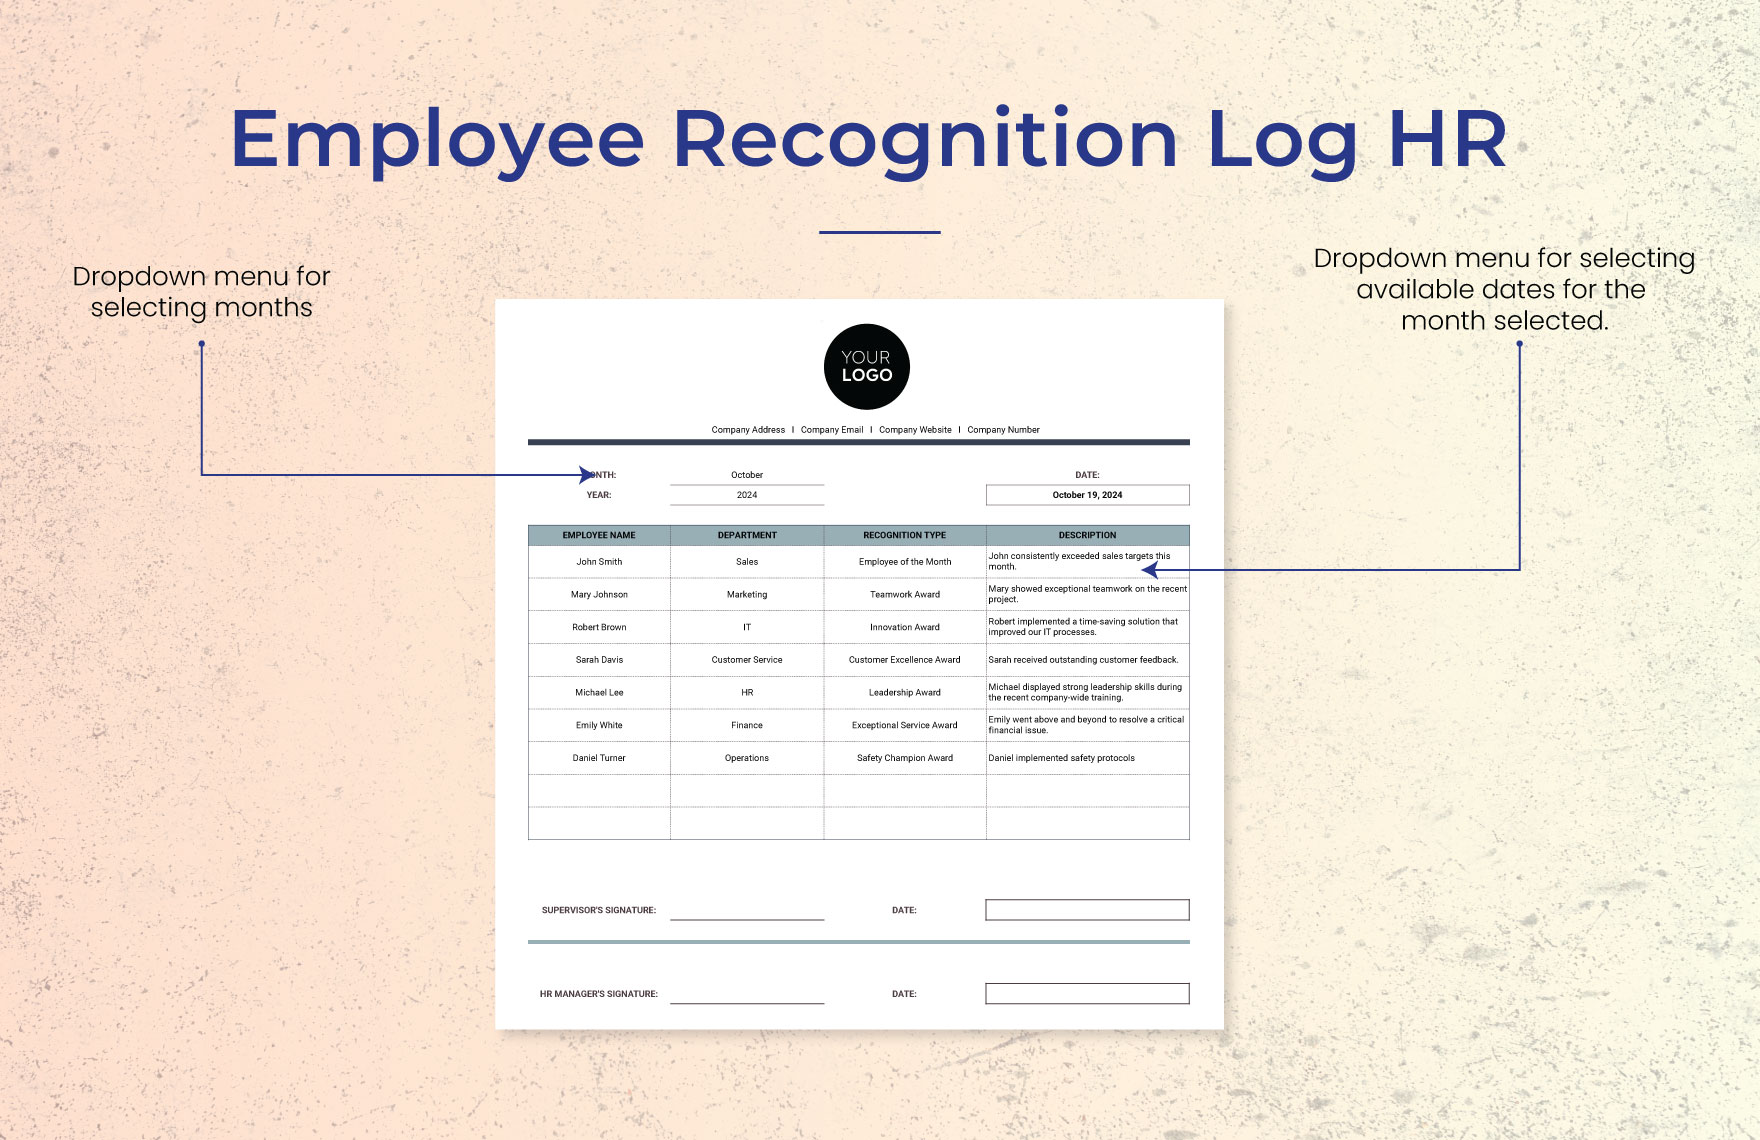 Employee Recognition Log HR Template